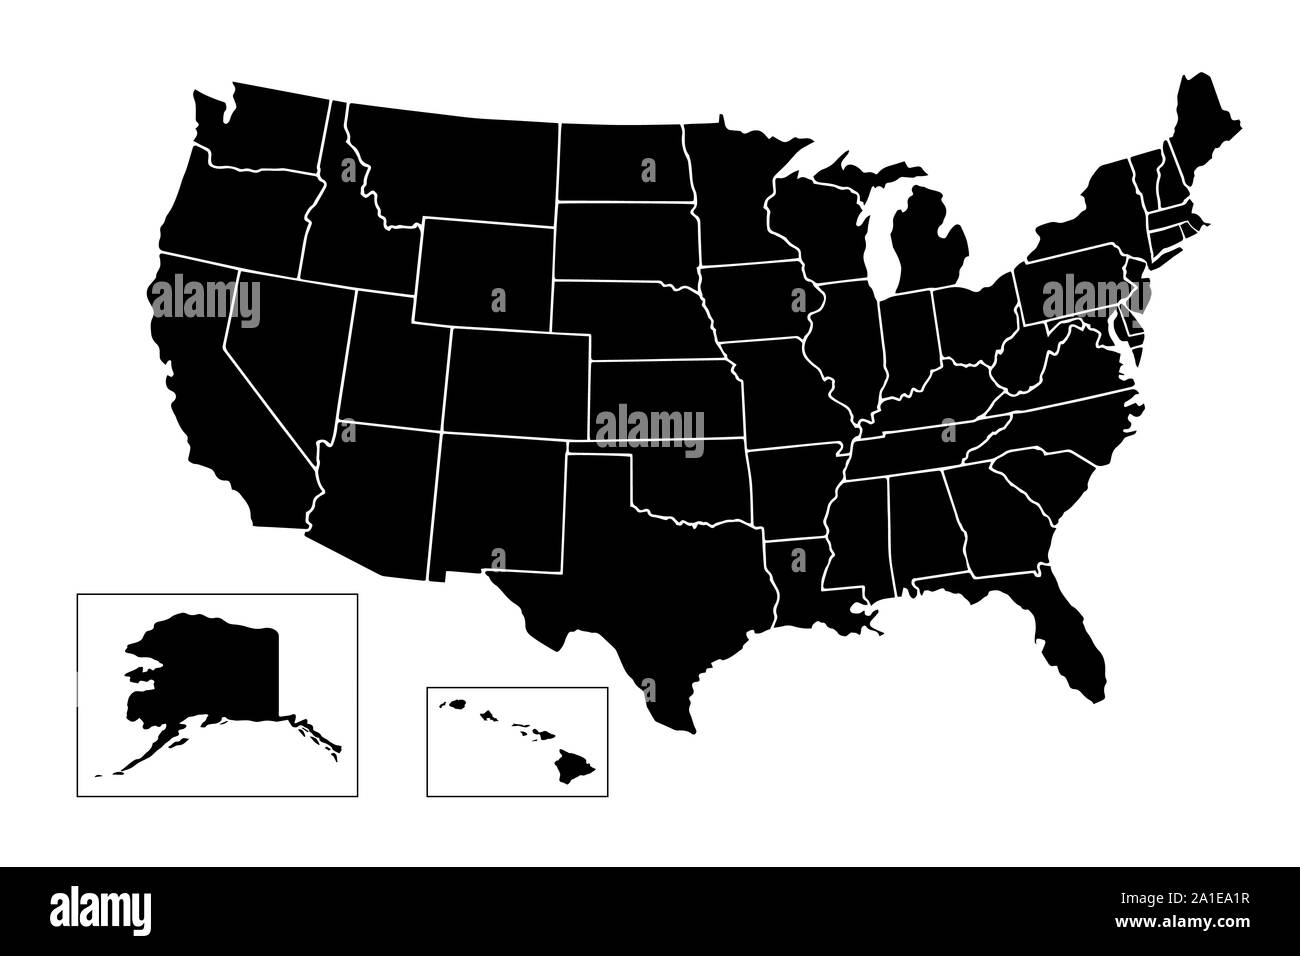 map of the united states of america black and white Usa Map Of United States Of America With Name Of States American map of the united states of america black and white